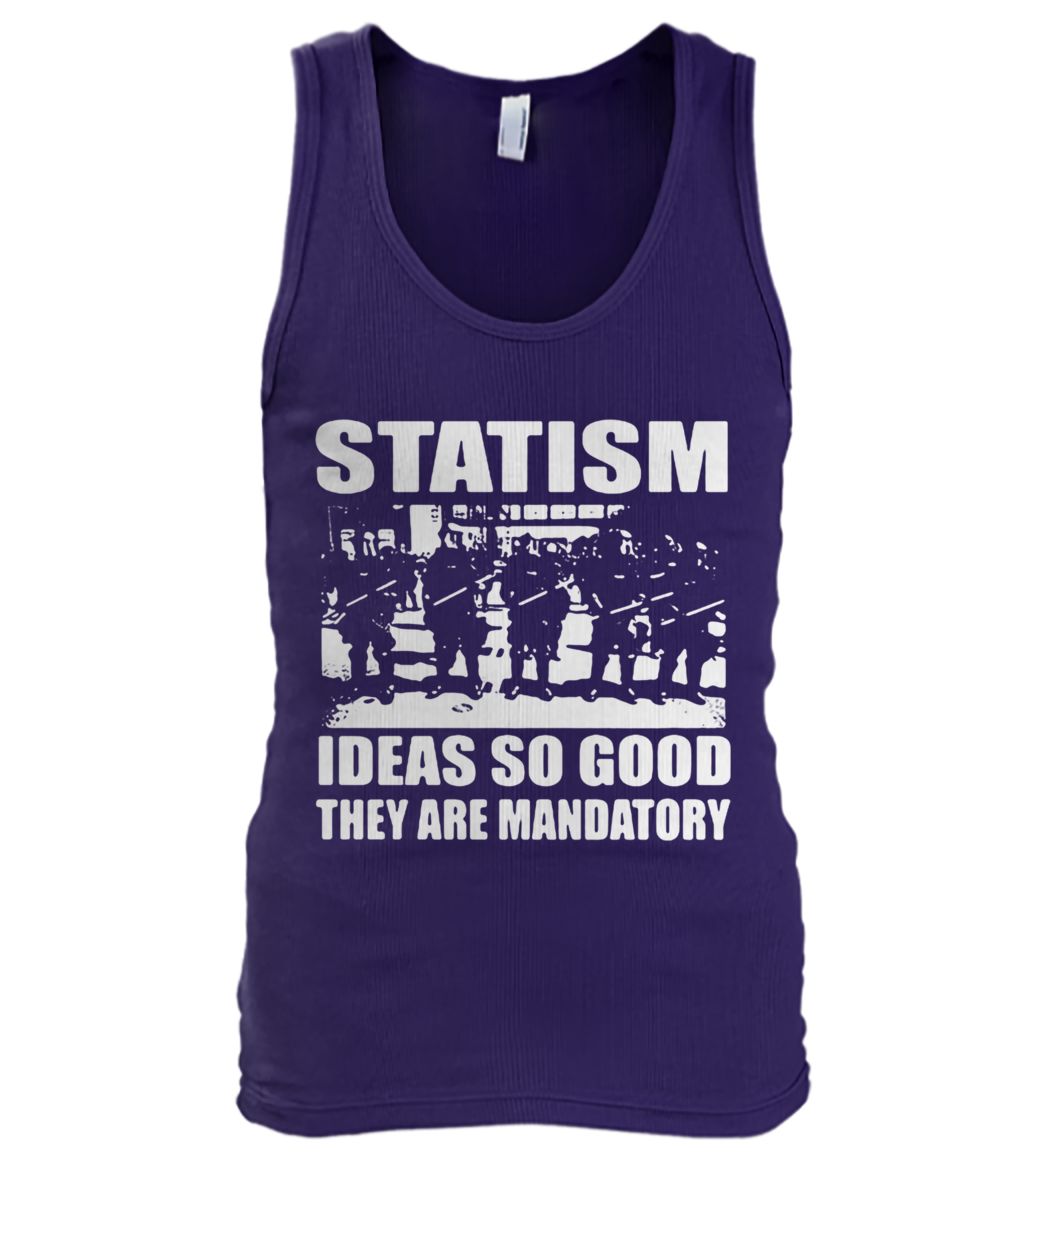 Police statism ideas so good they are mandatory men's tank top